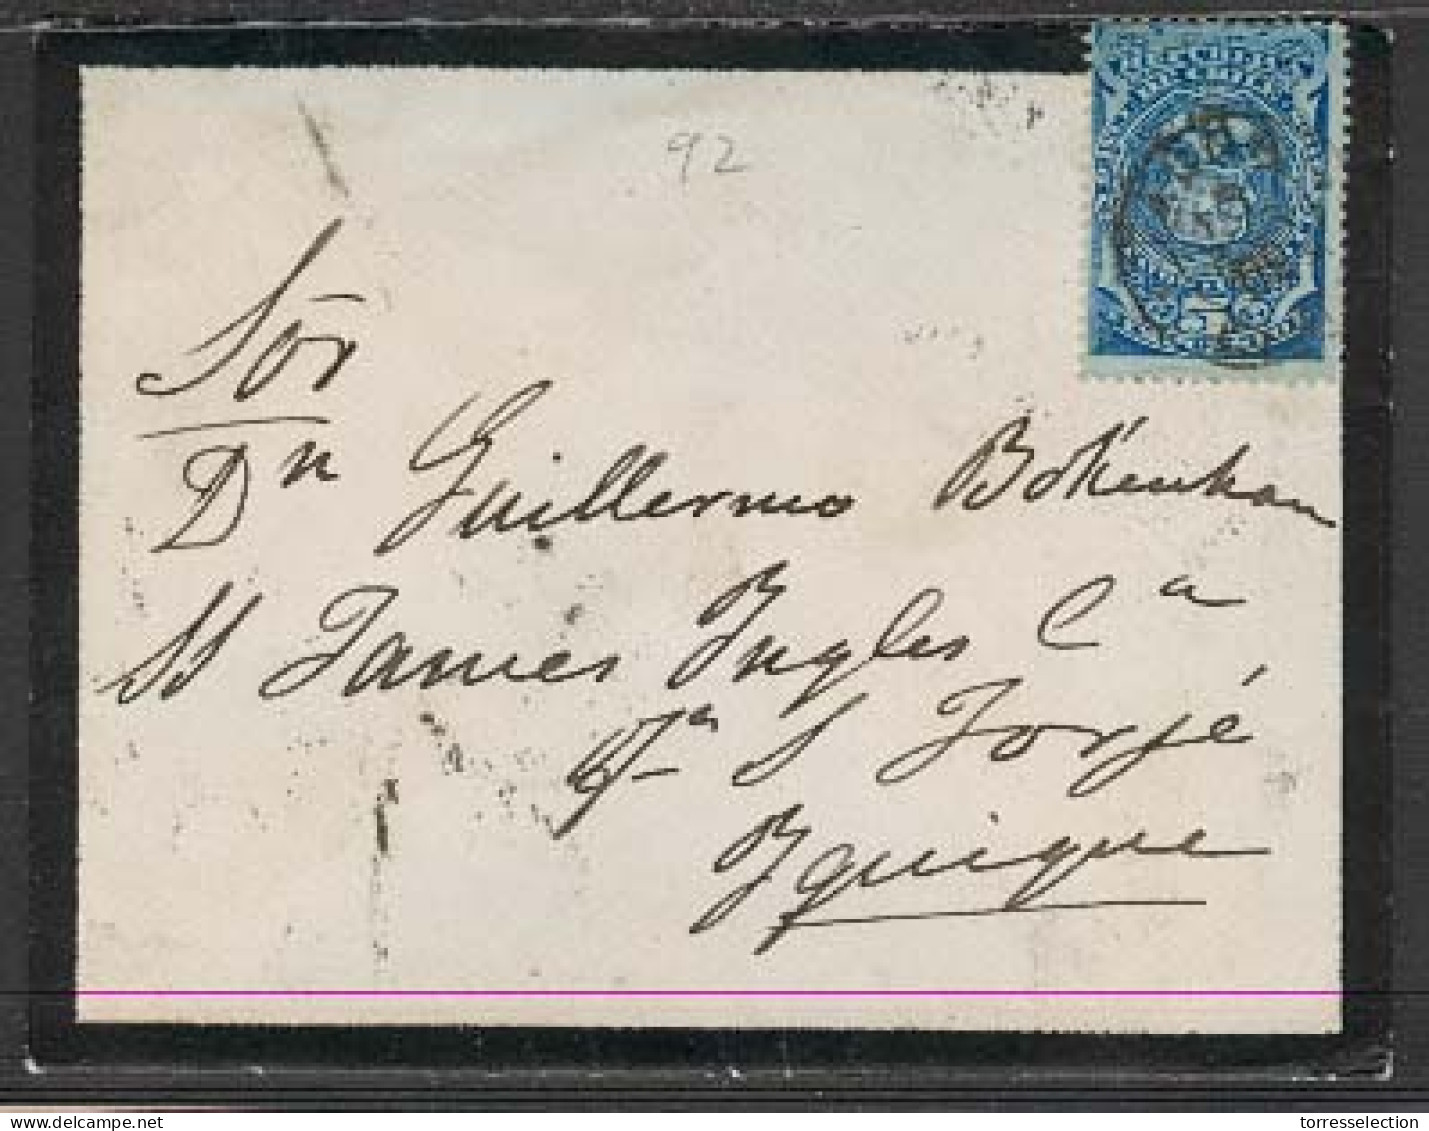 CHILE. 1892 (10 April). Tacna - Iquique. Provisional Period / No Postage Stamps Available / Env Fkd 5c Dark Blue Impuest - Cile